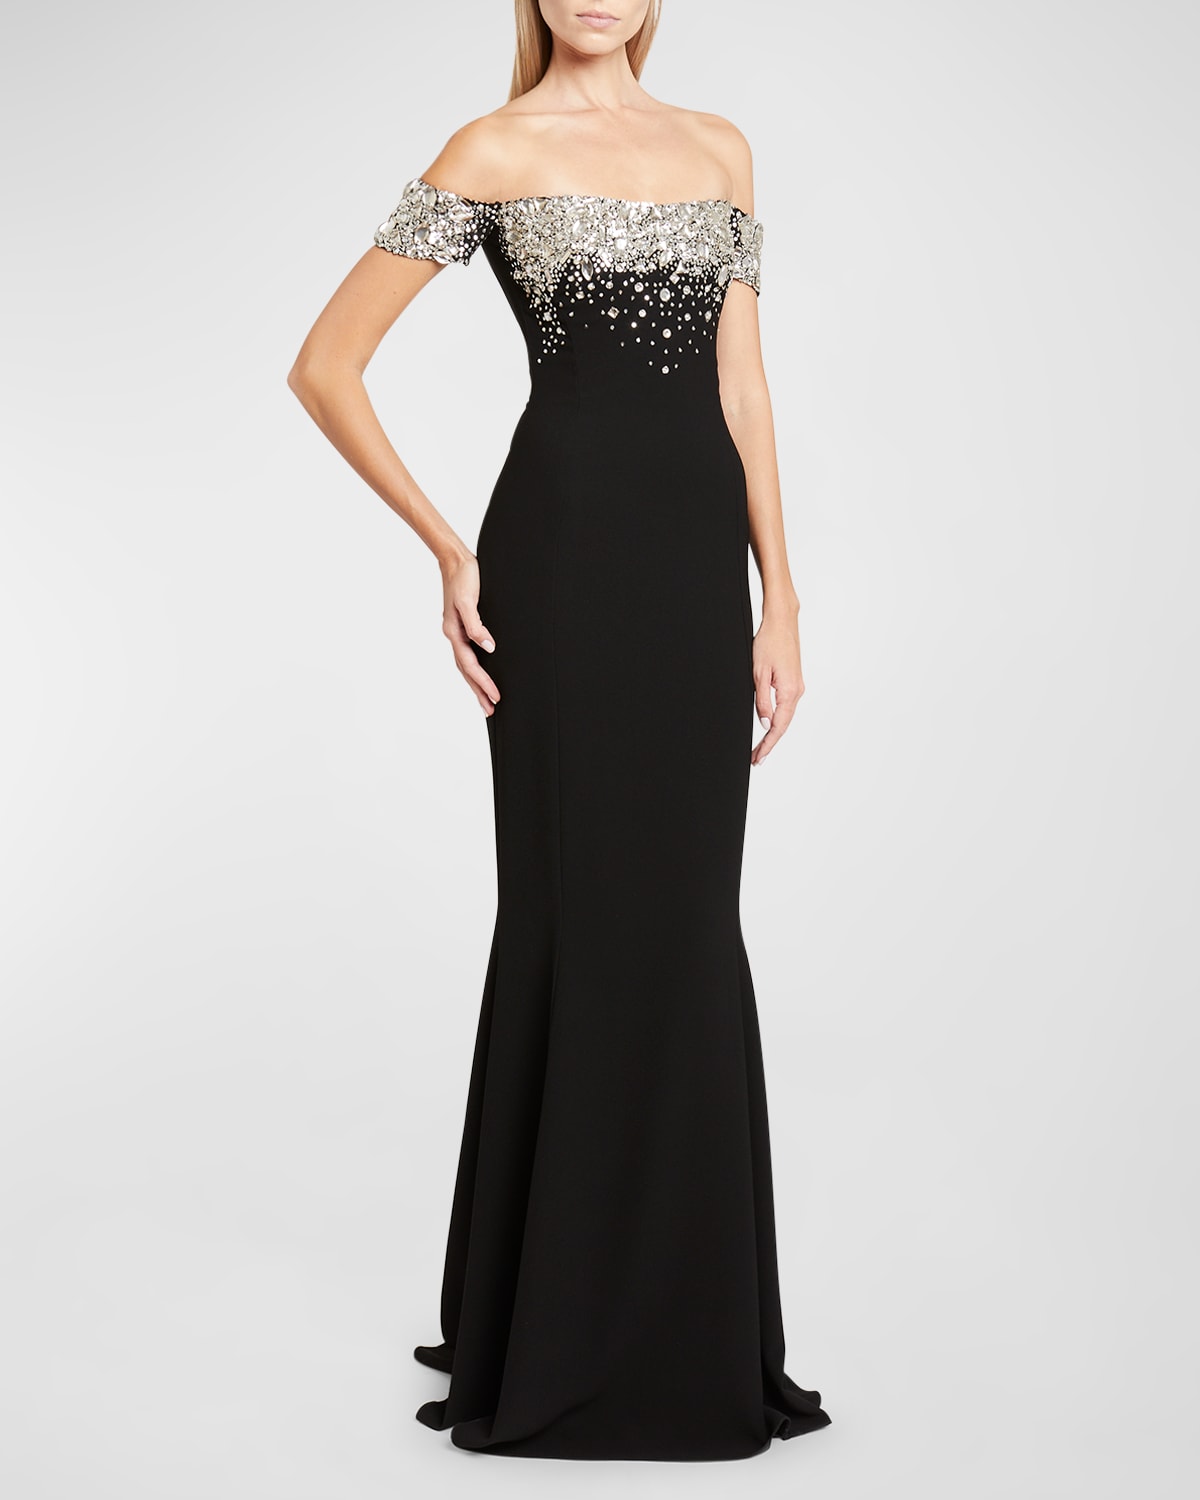 Degrade Crystal Embroidered Off-The-Shoulder Mermaid Gown